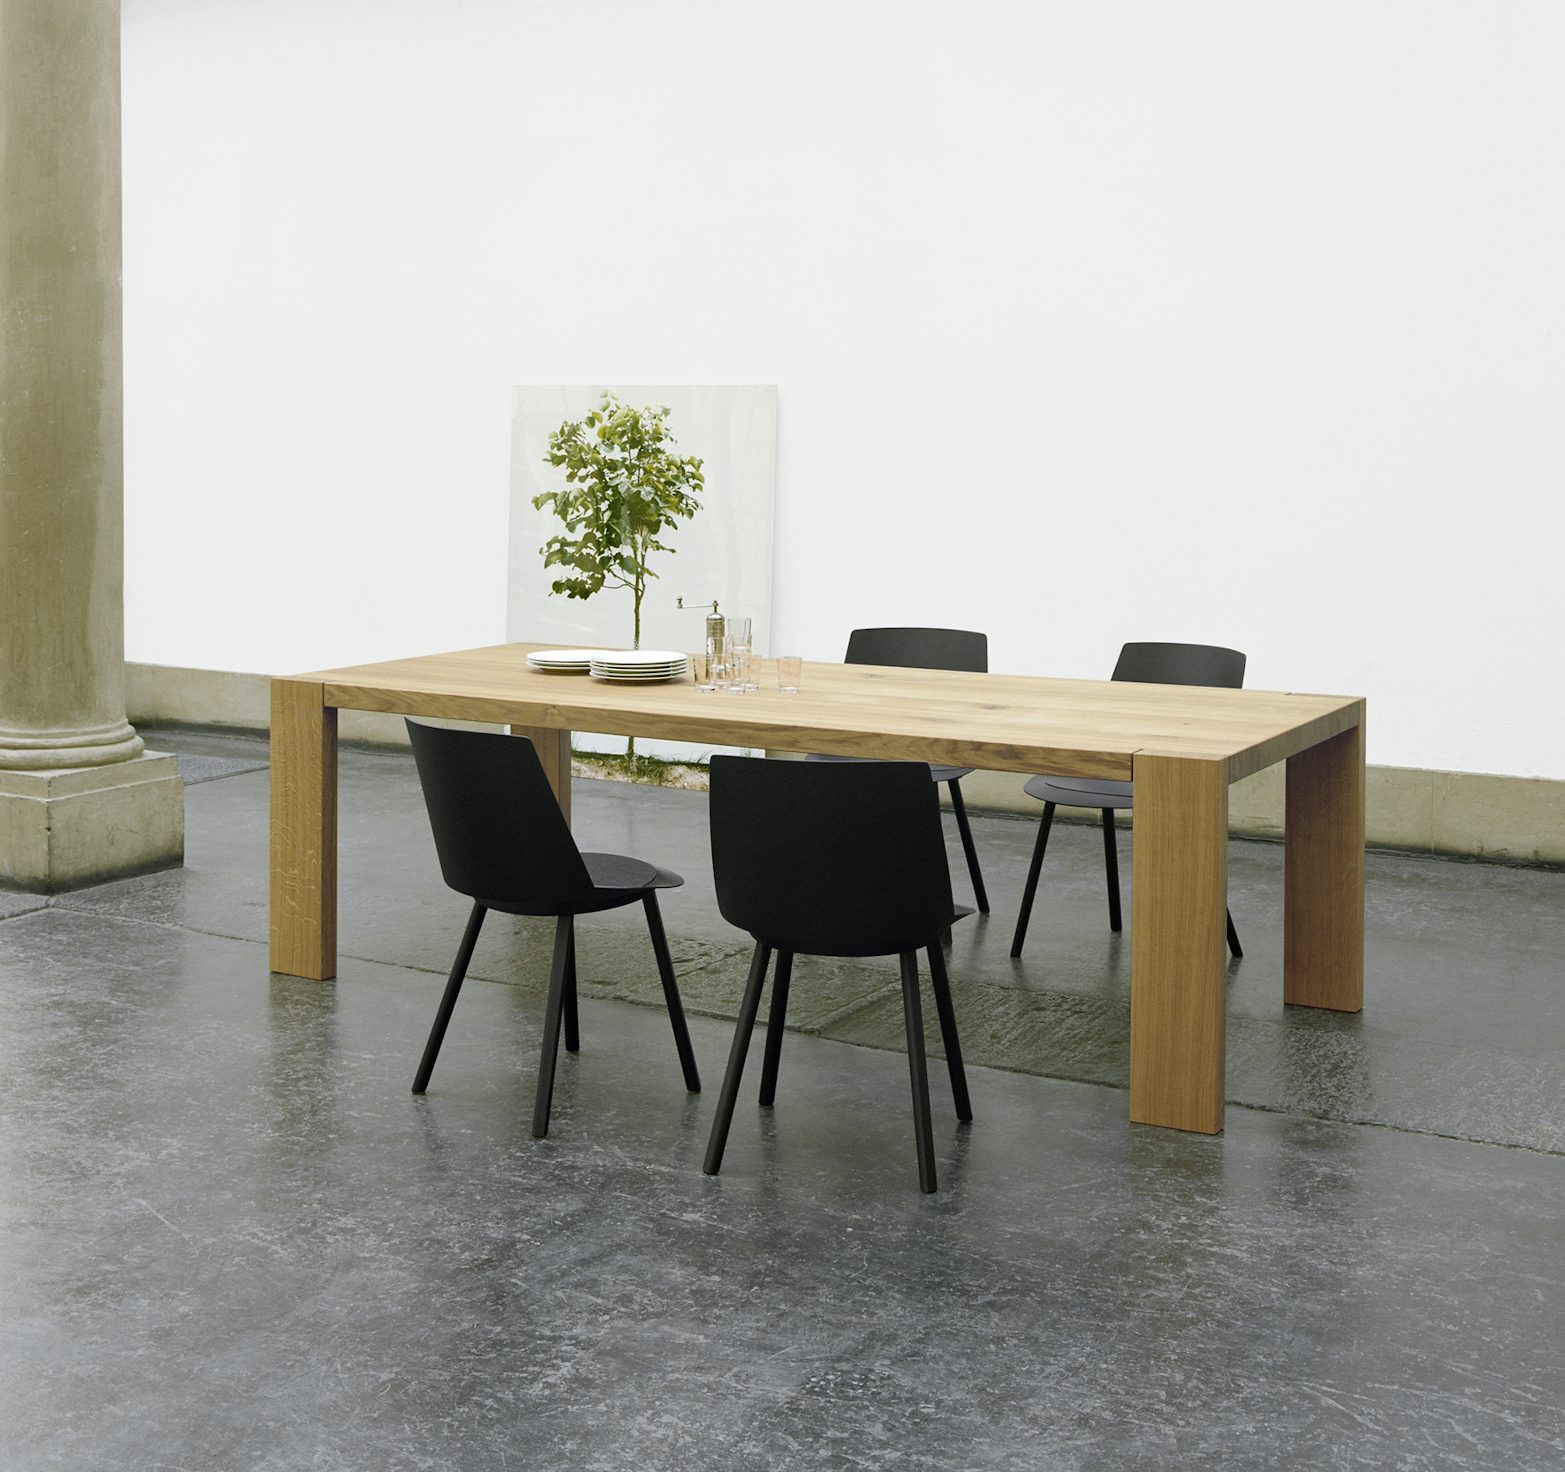 e15 london table with houdini side chair in black